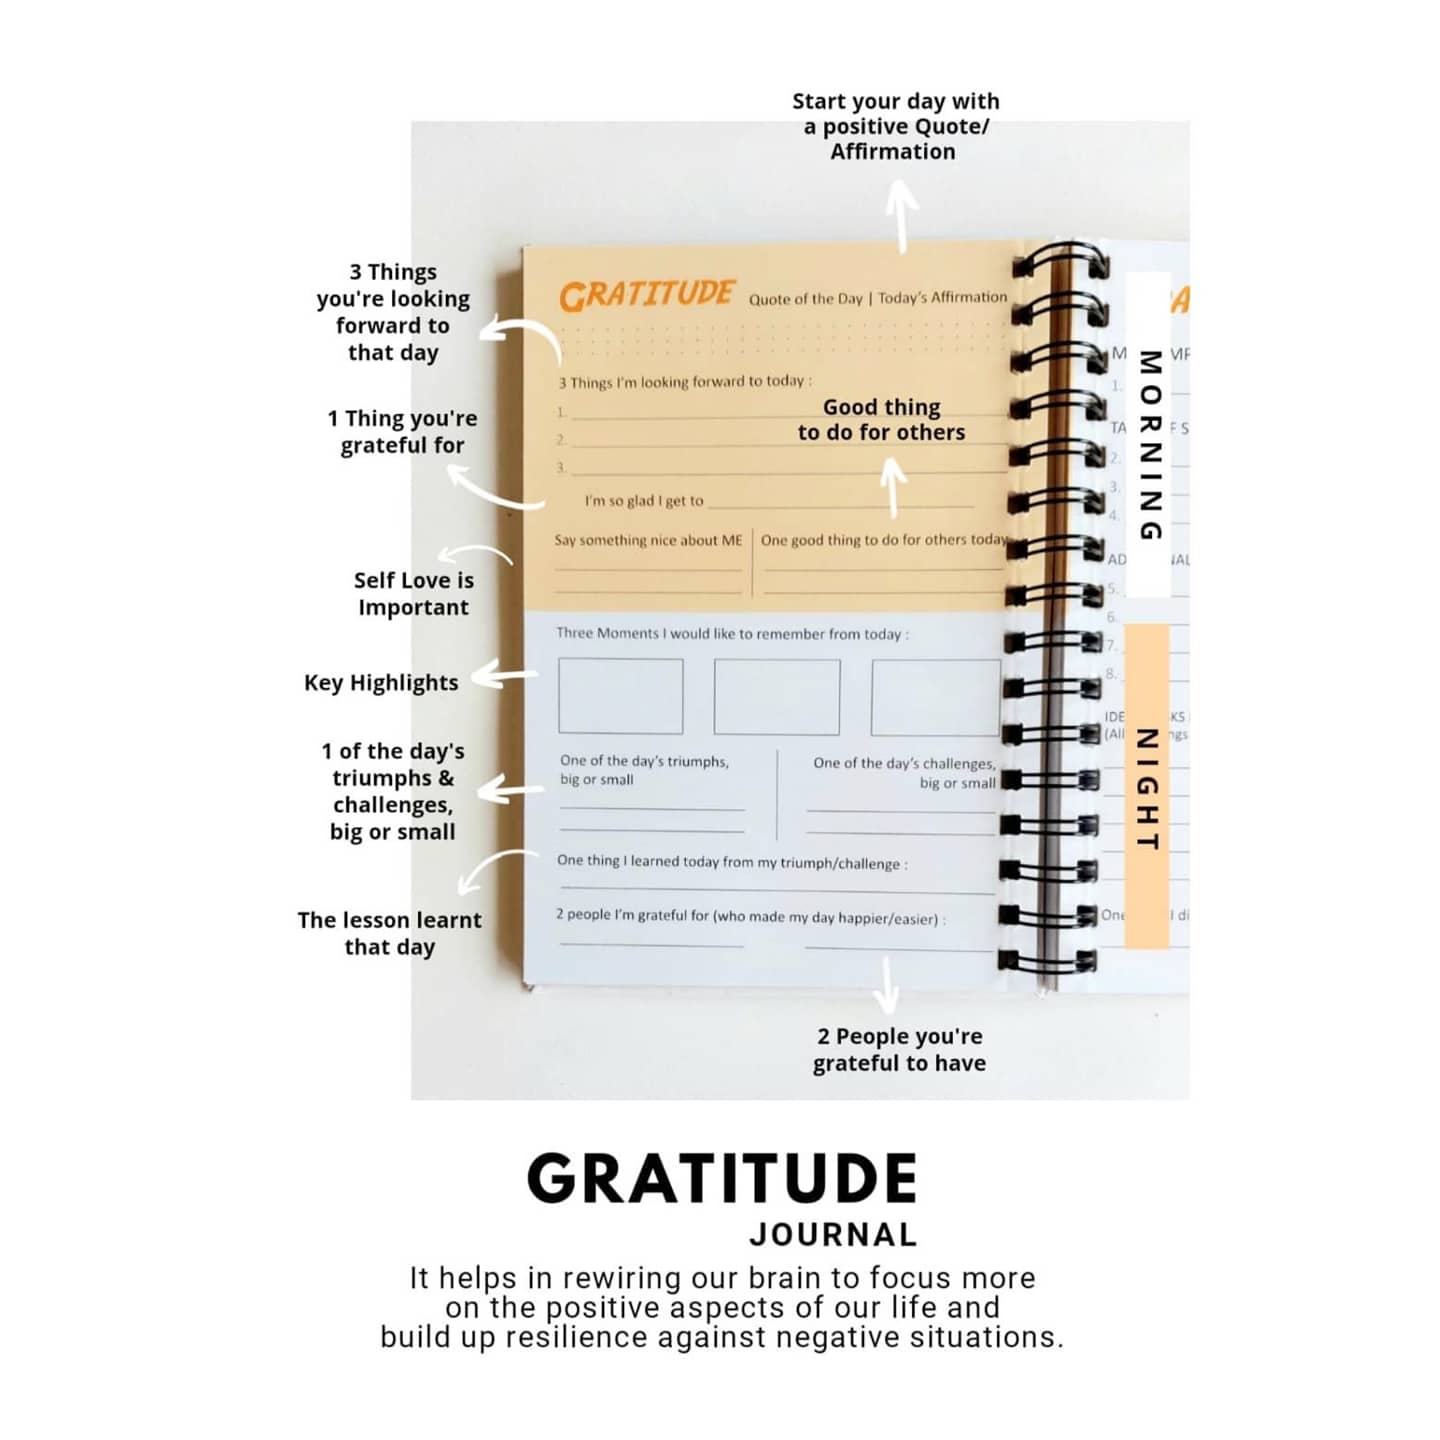 Work From Home (WFH) - Daily Productivity Planner & Gratitude Journal